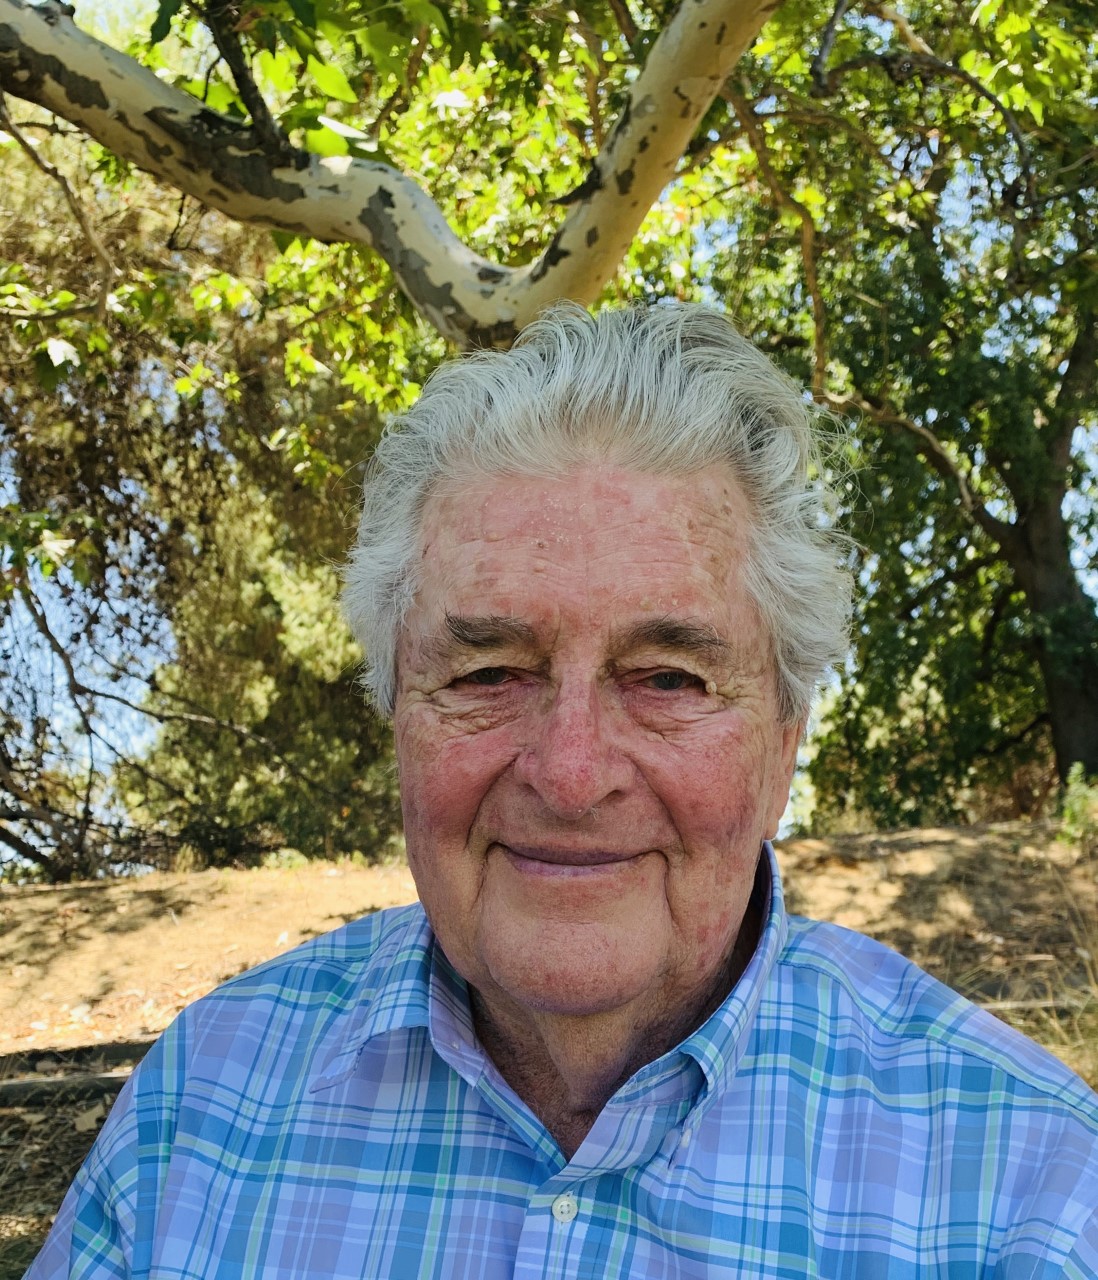 Older man, with trees in the background